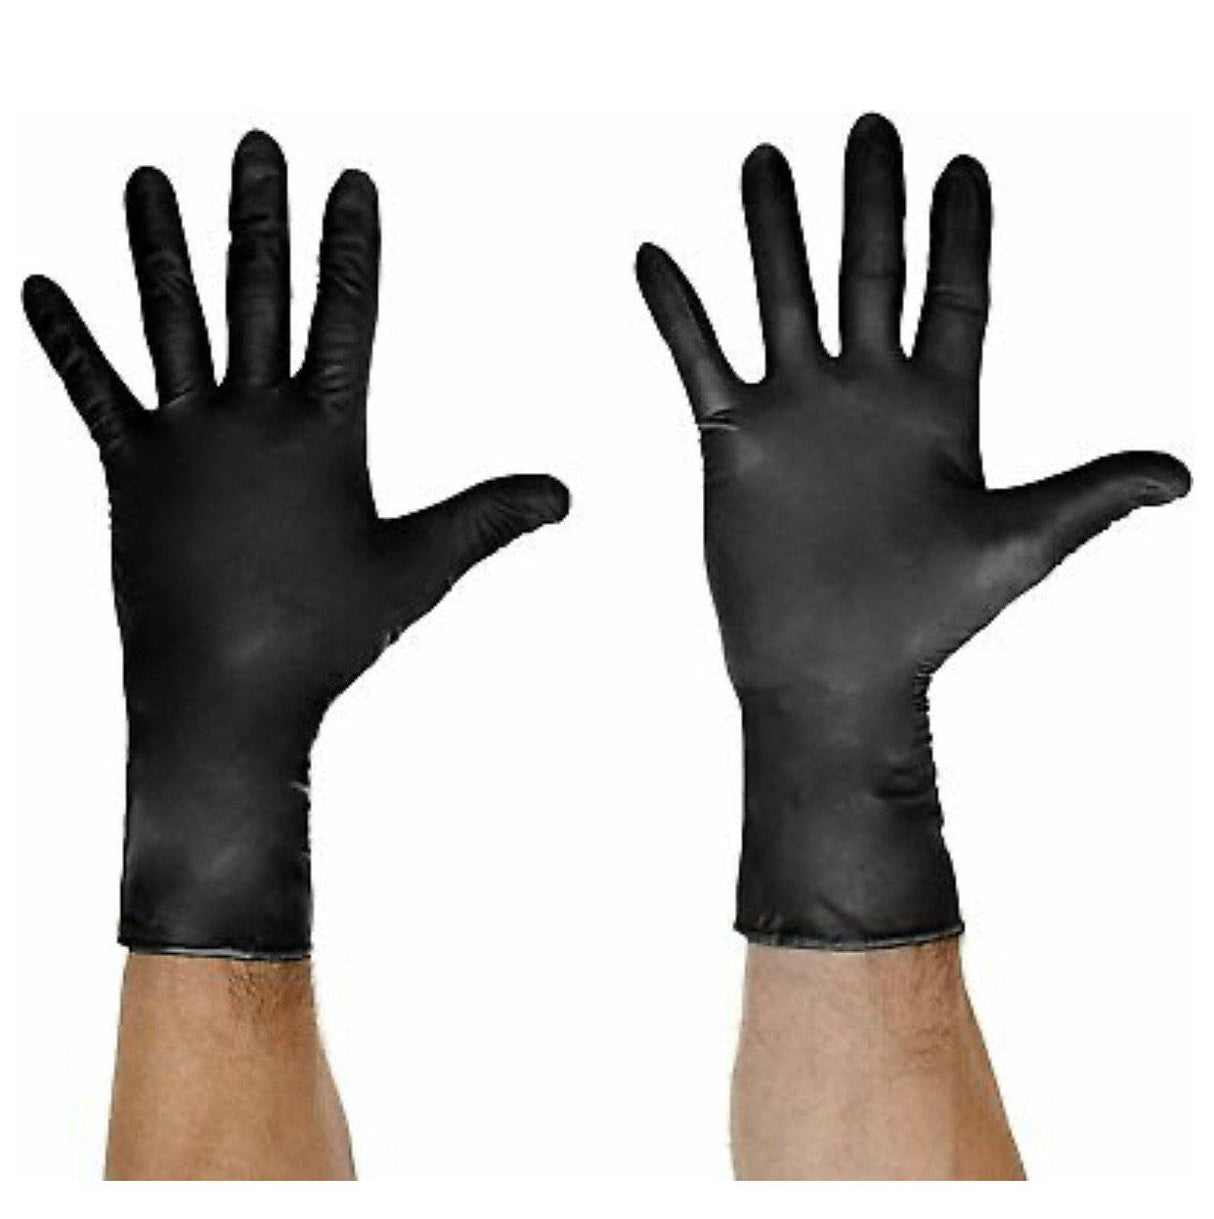 Grease Monkey Large Disposable Nitrile Gloves - 50 Ct.